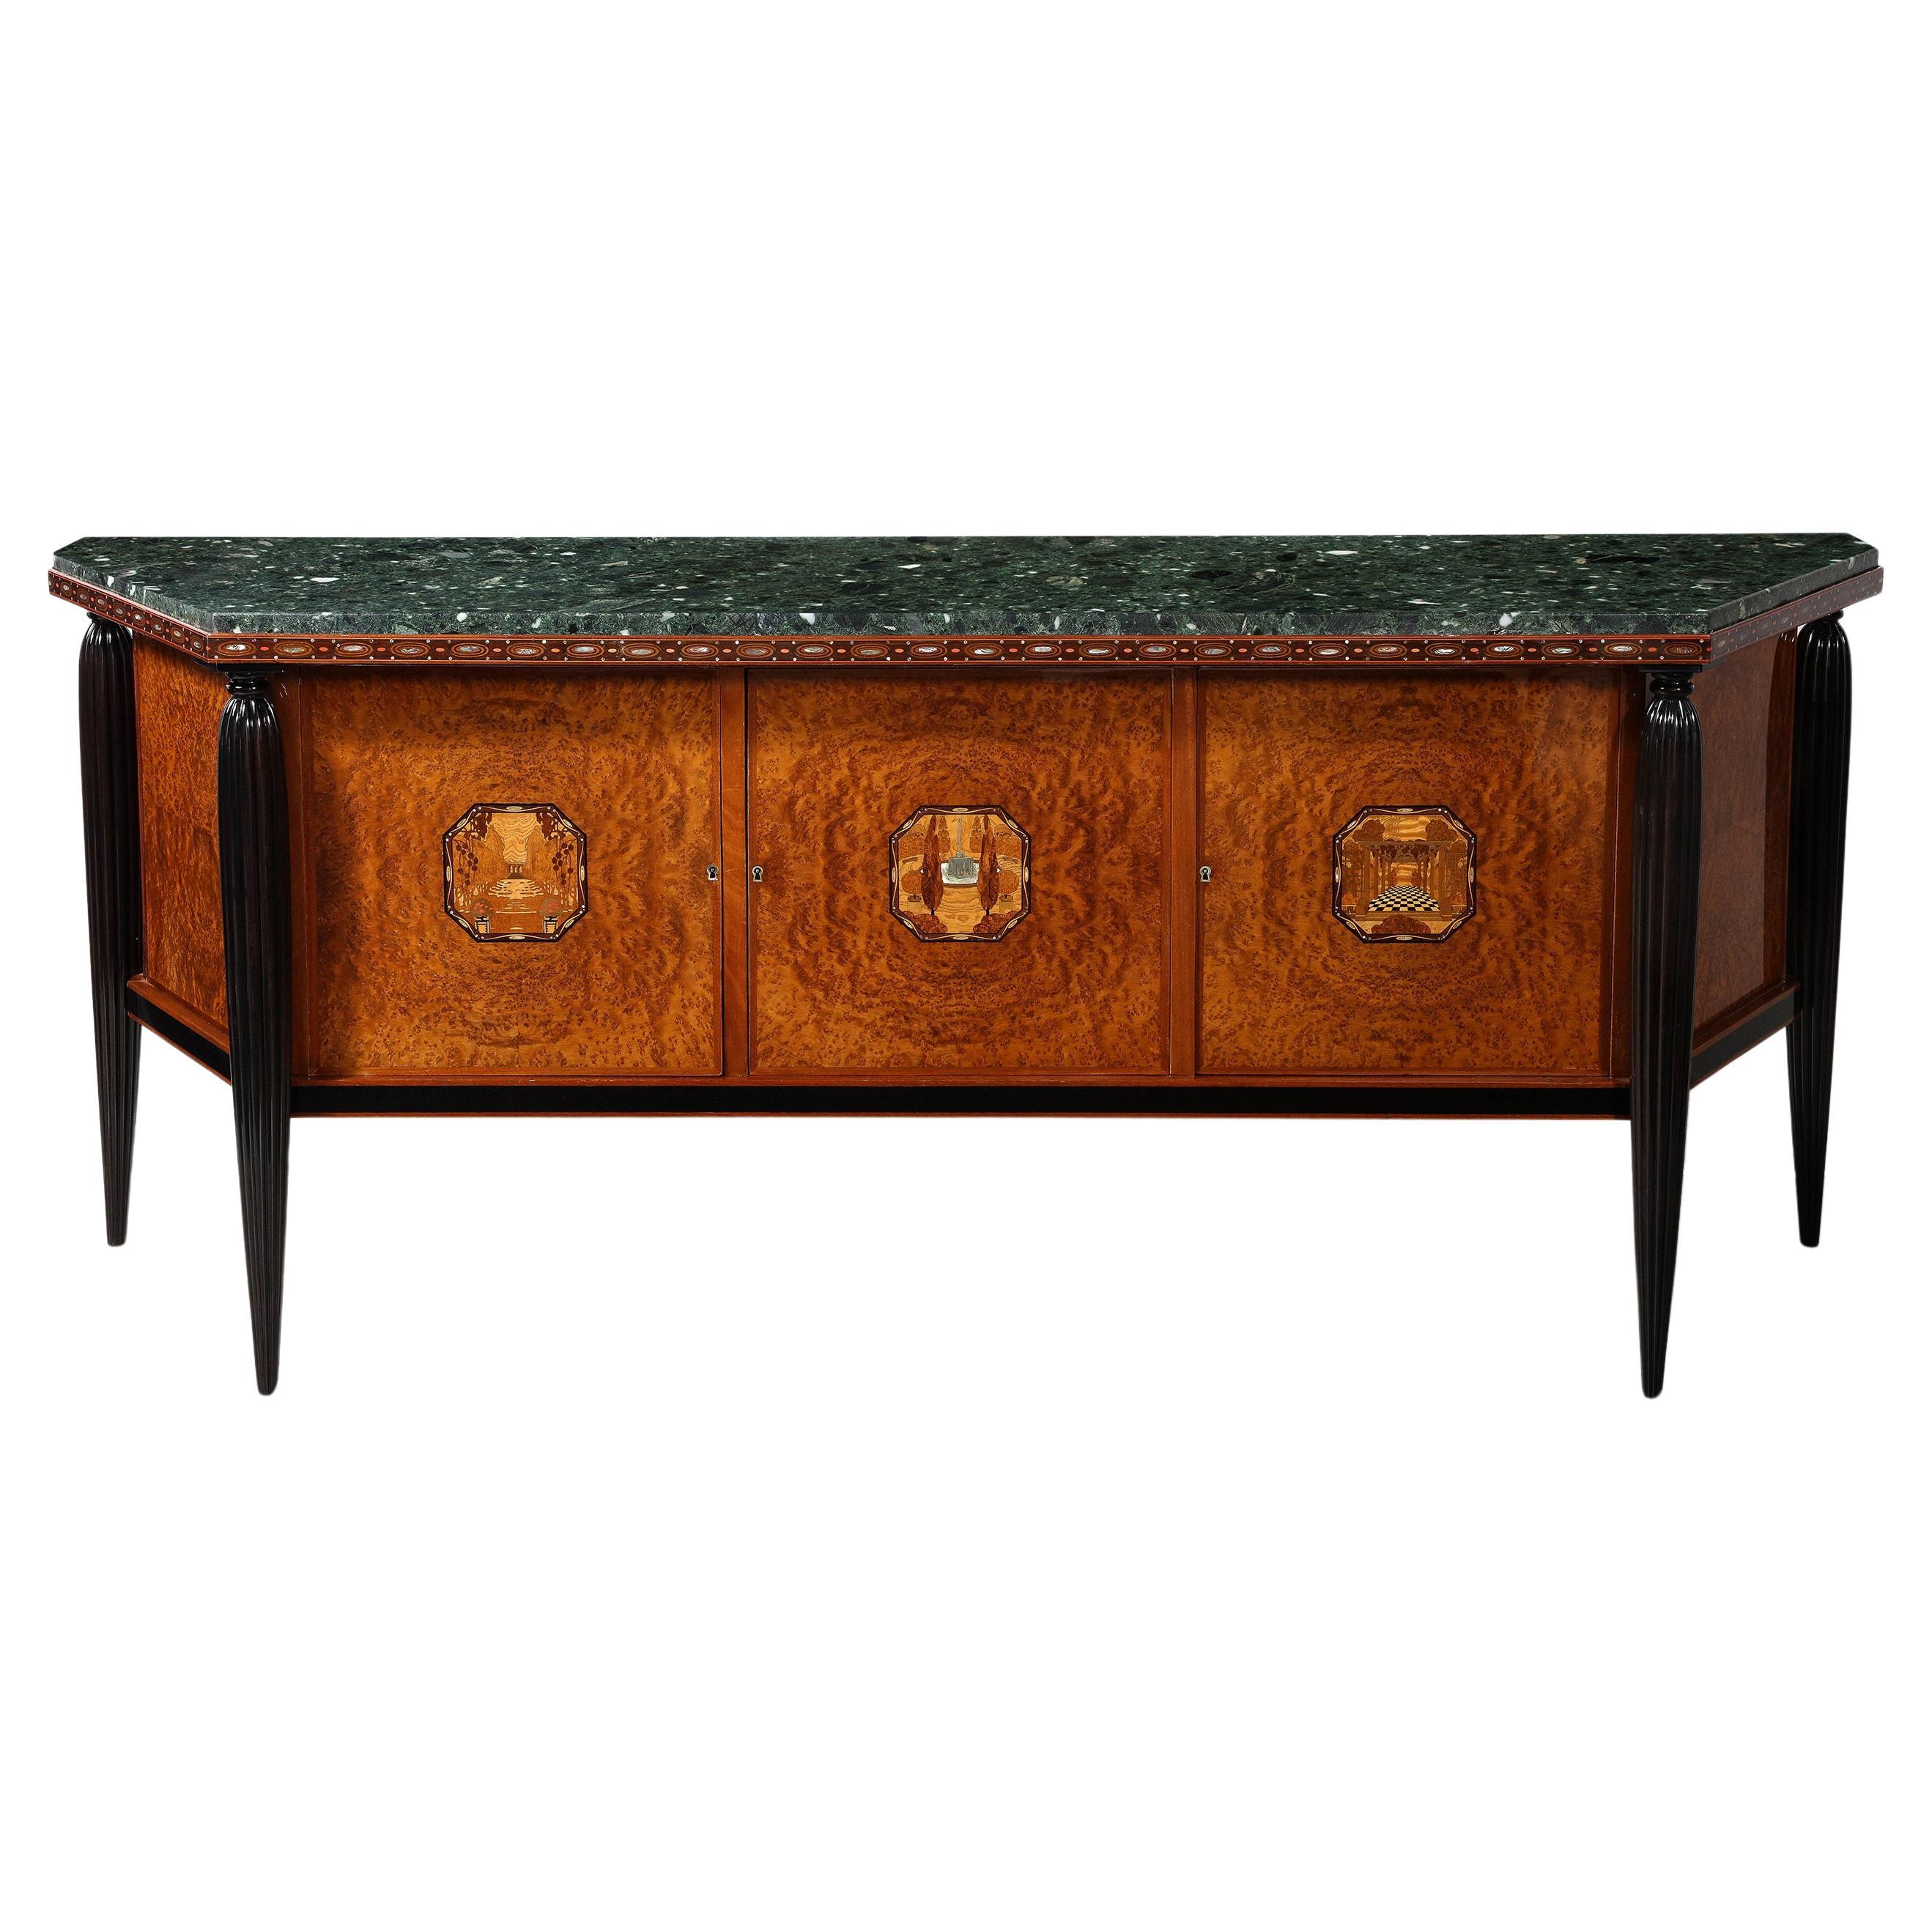 Important and Unique Art Deco Sideboard For Sale